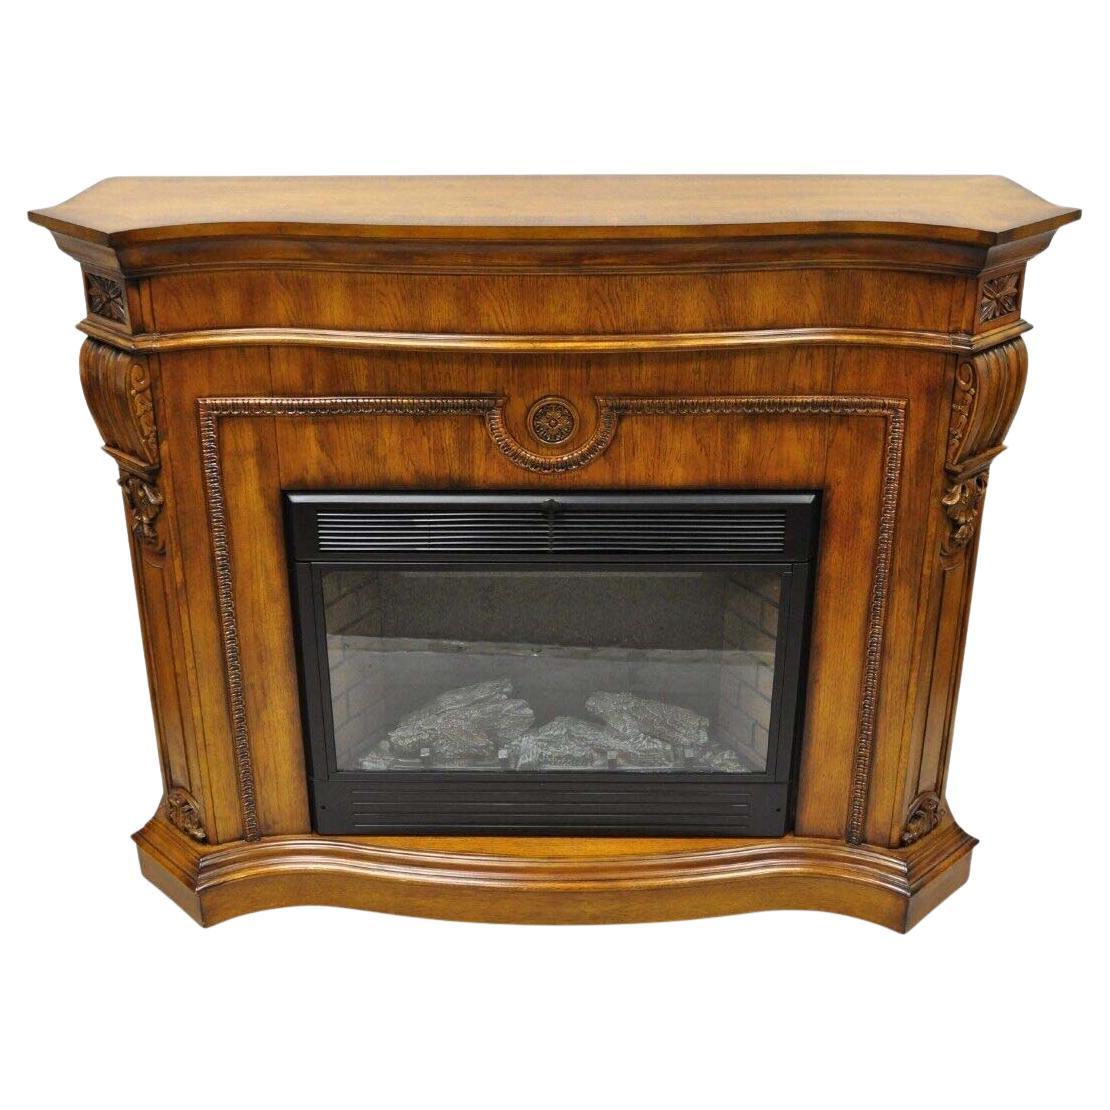 Twin Star International 62" Cherry Wood Empire Style Heater TV Stand Fireplace For Sale